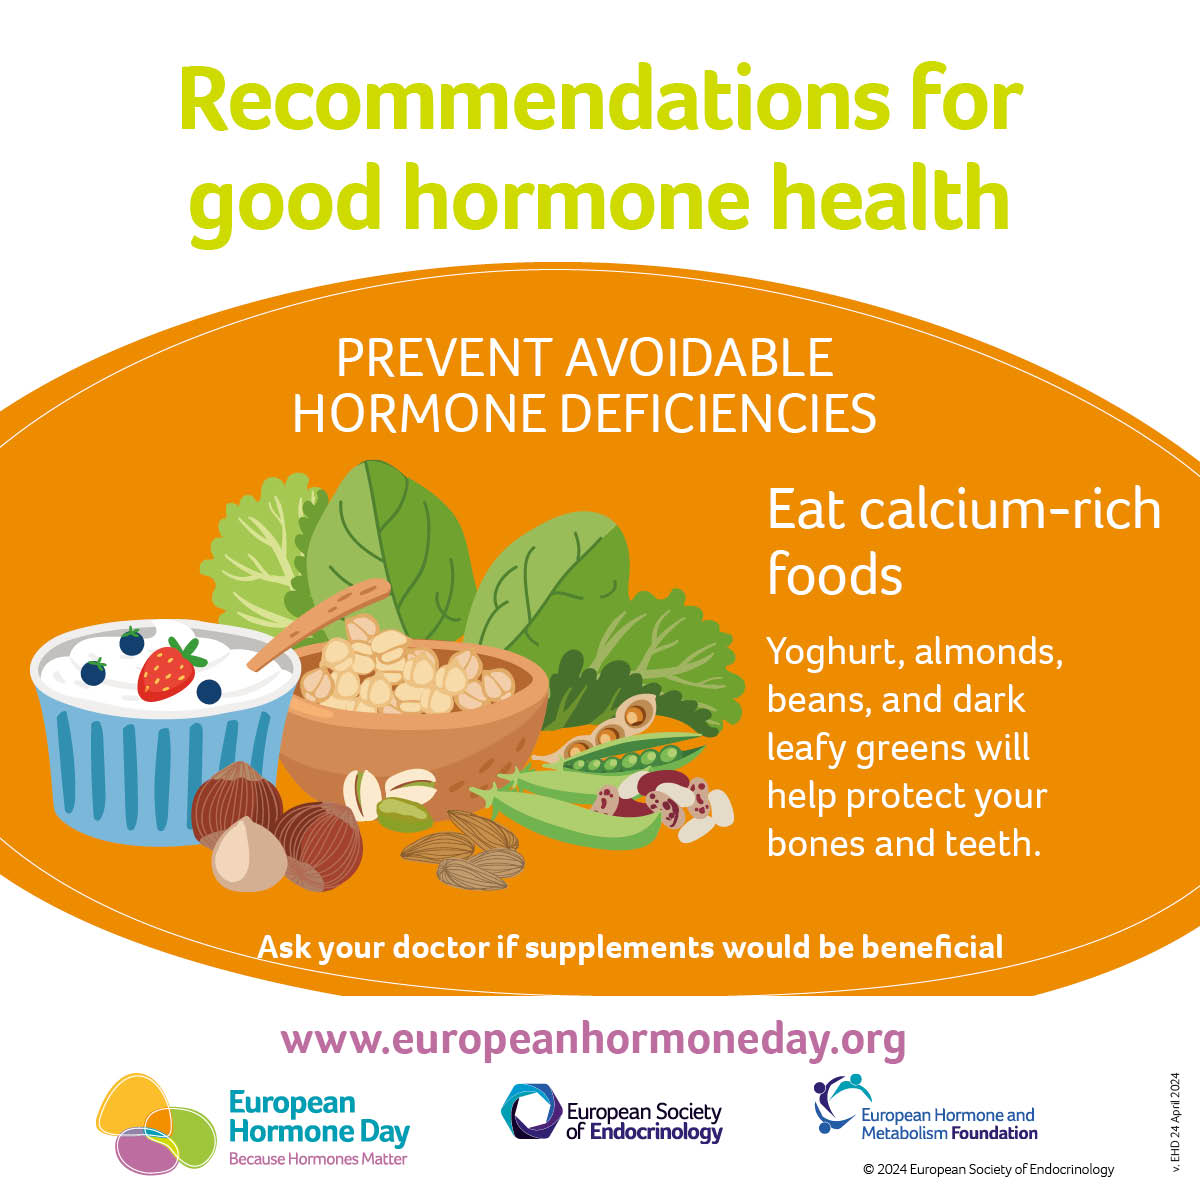 Did you know eating a good diet, being active, and getting enough sleep can contribute to good hormone health? #BecauseHormonesMatter #EuropeanHormoneDay @ESEndocrinology